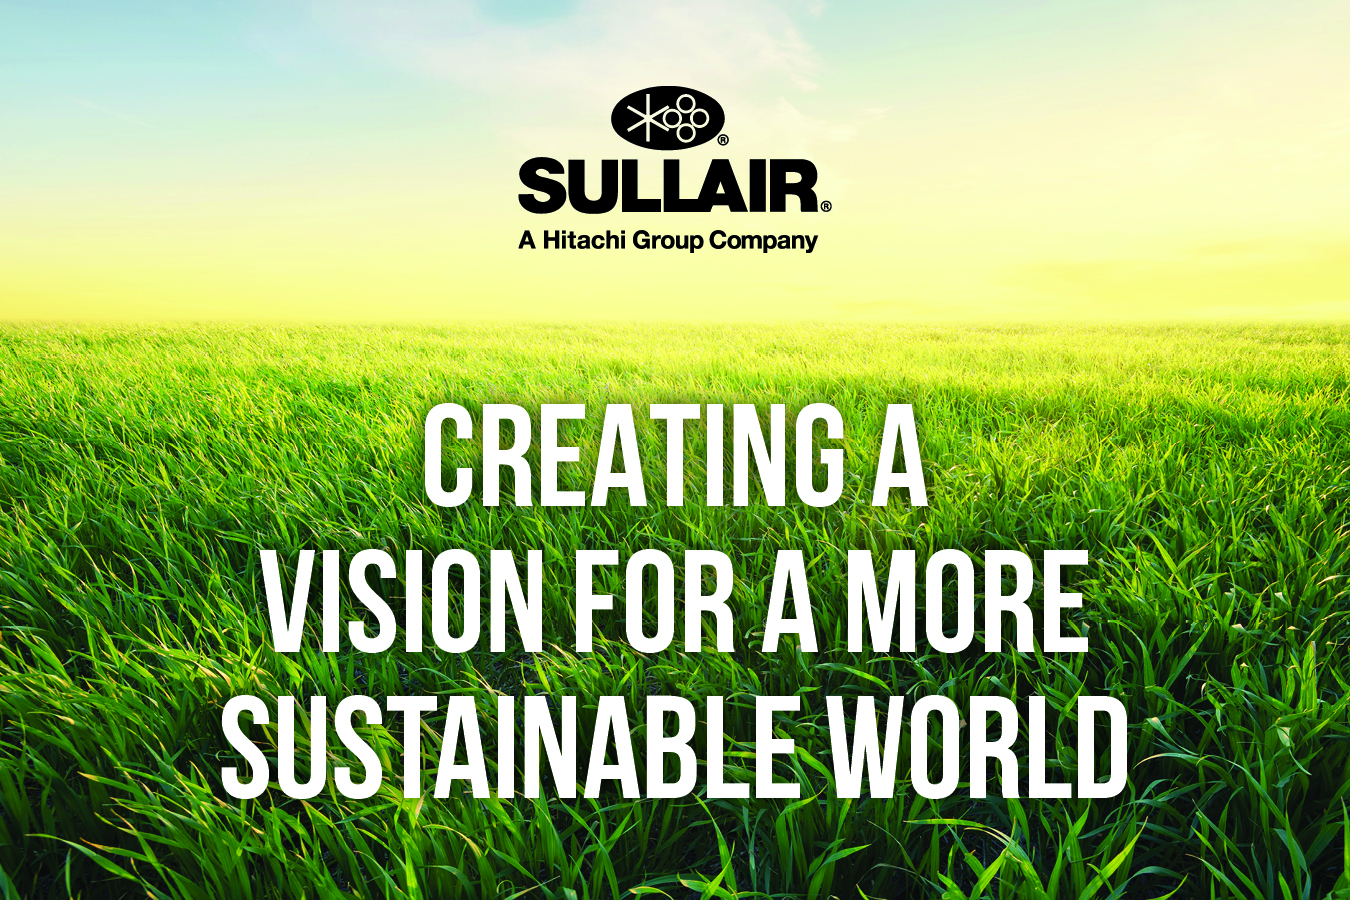 Sullair Announces Climate Change Action with Goal of Reaching Carbon Neutrality in 2023